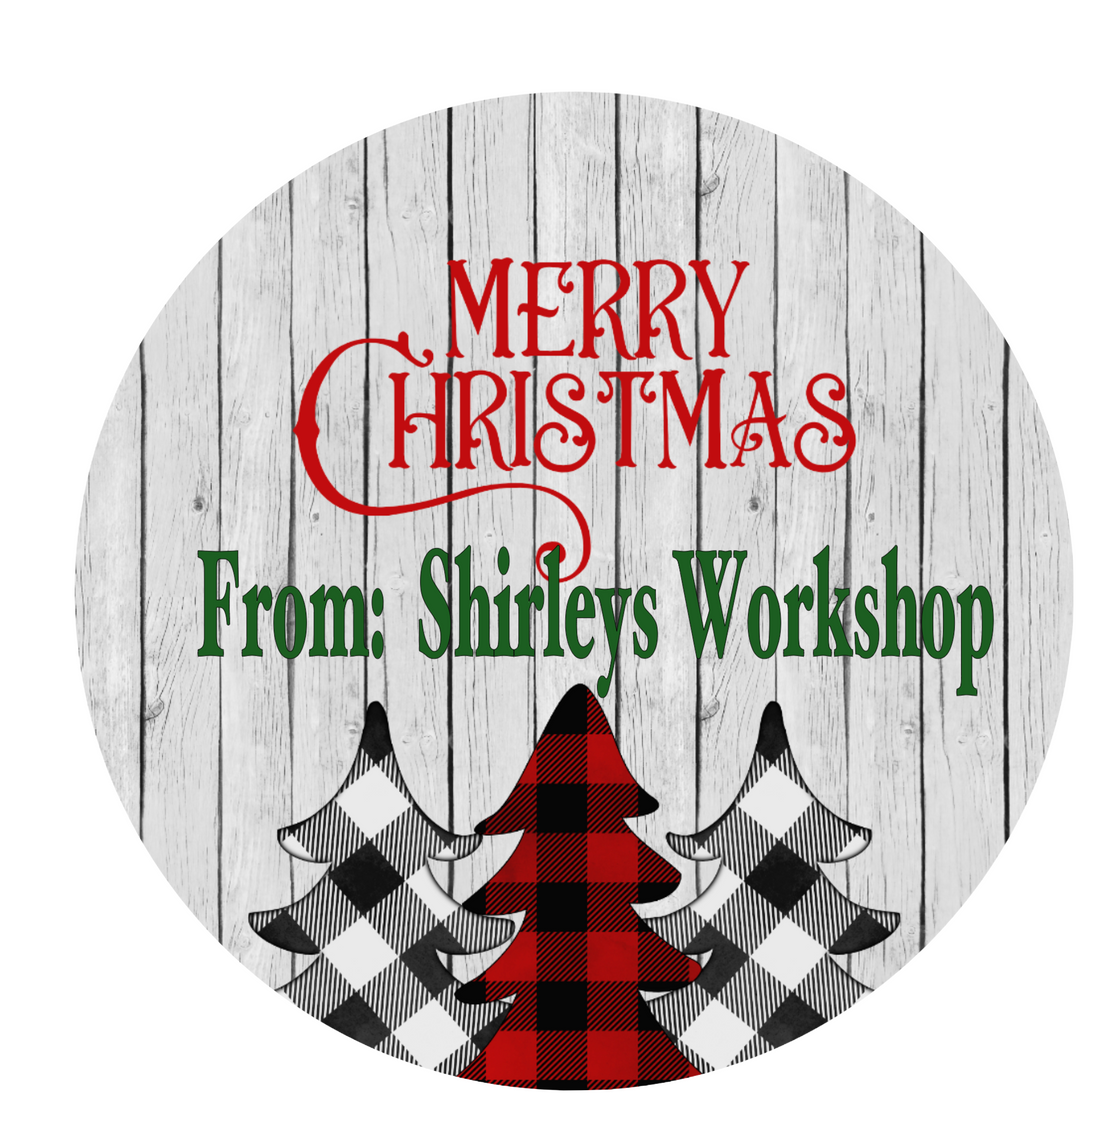 Merry Christmas from shirleys Workshop